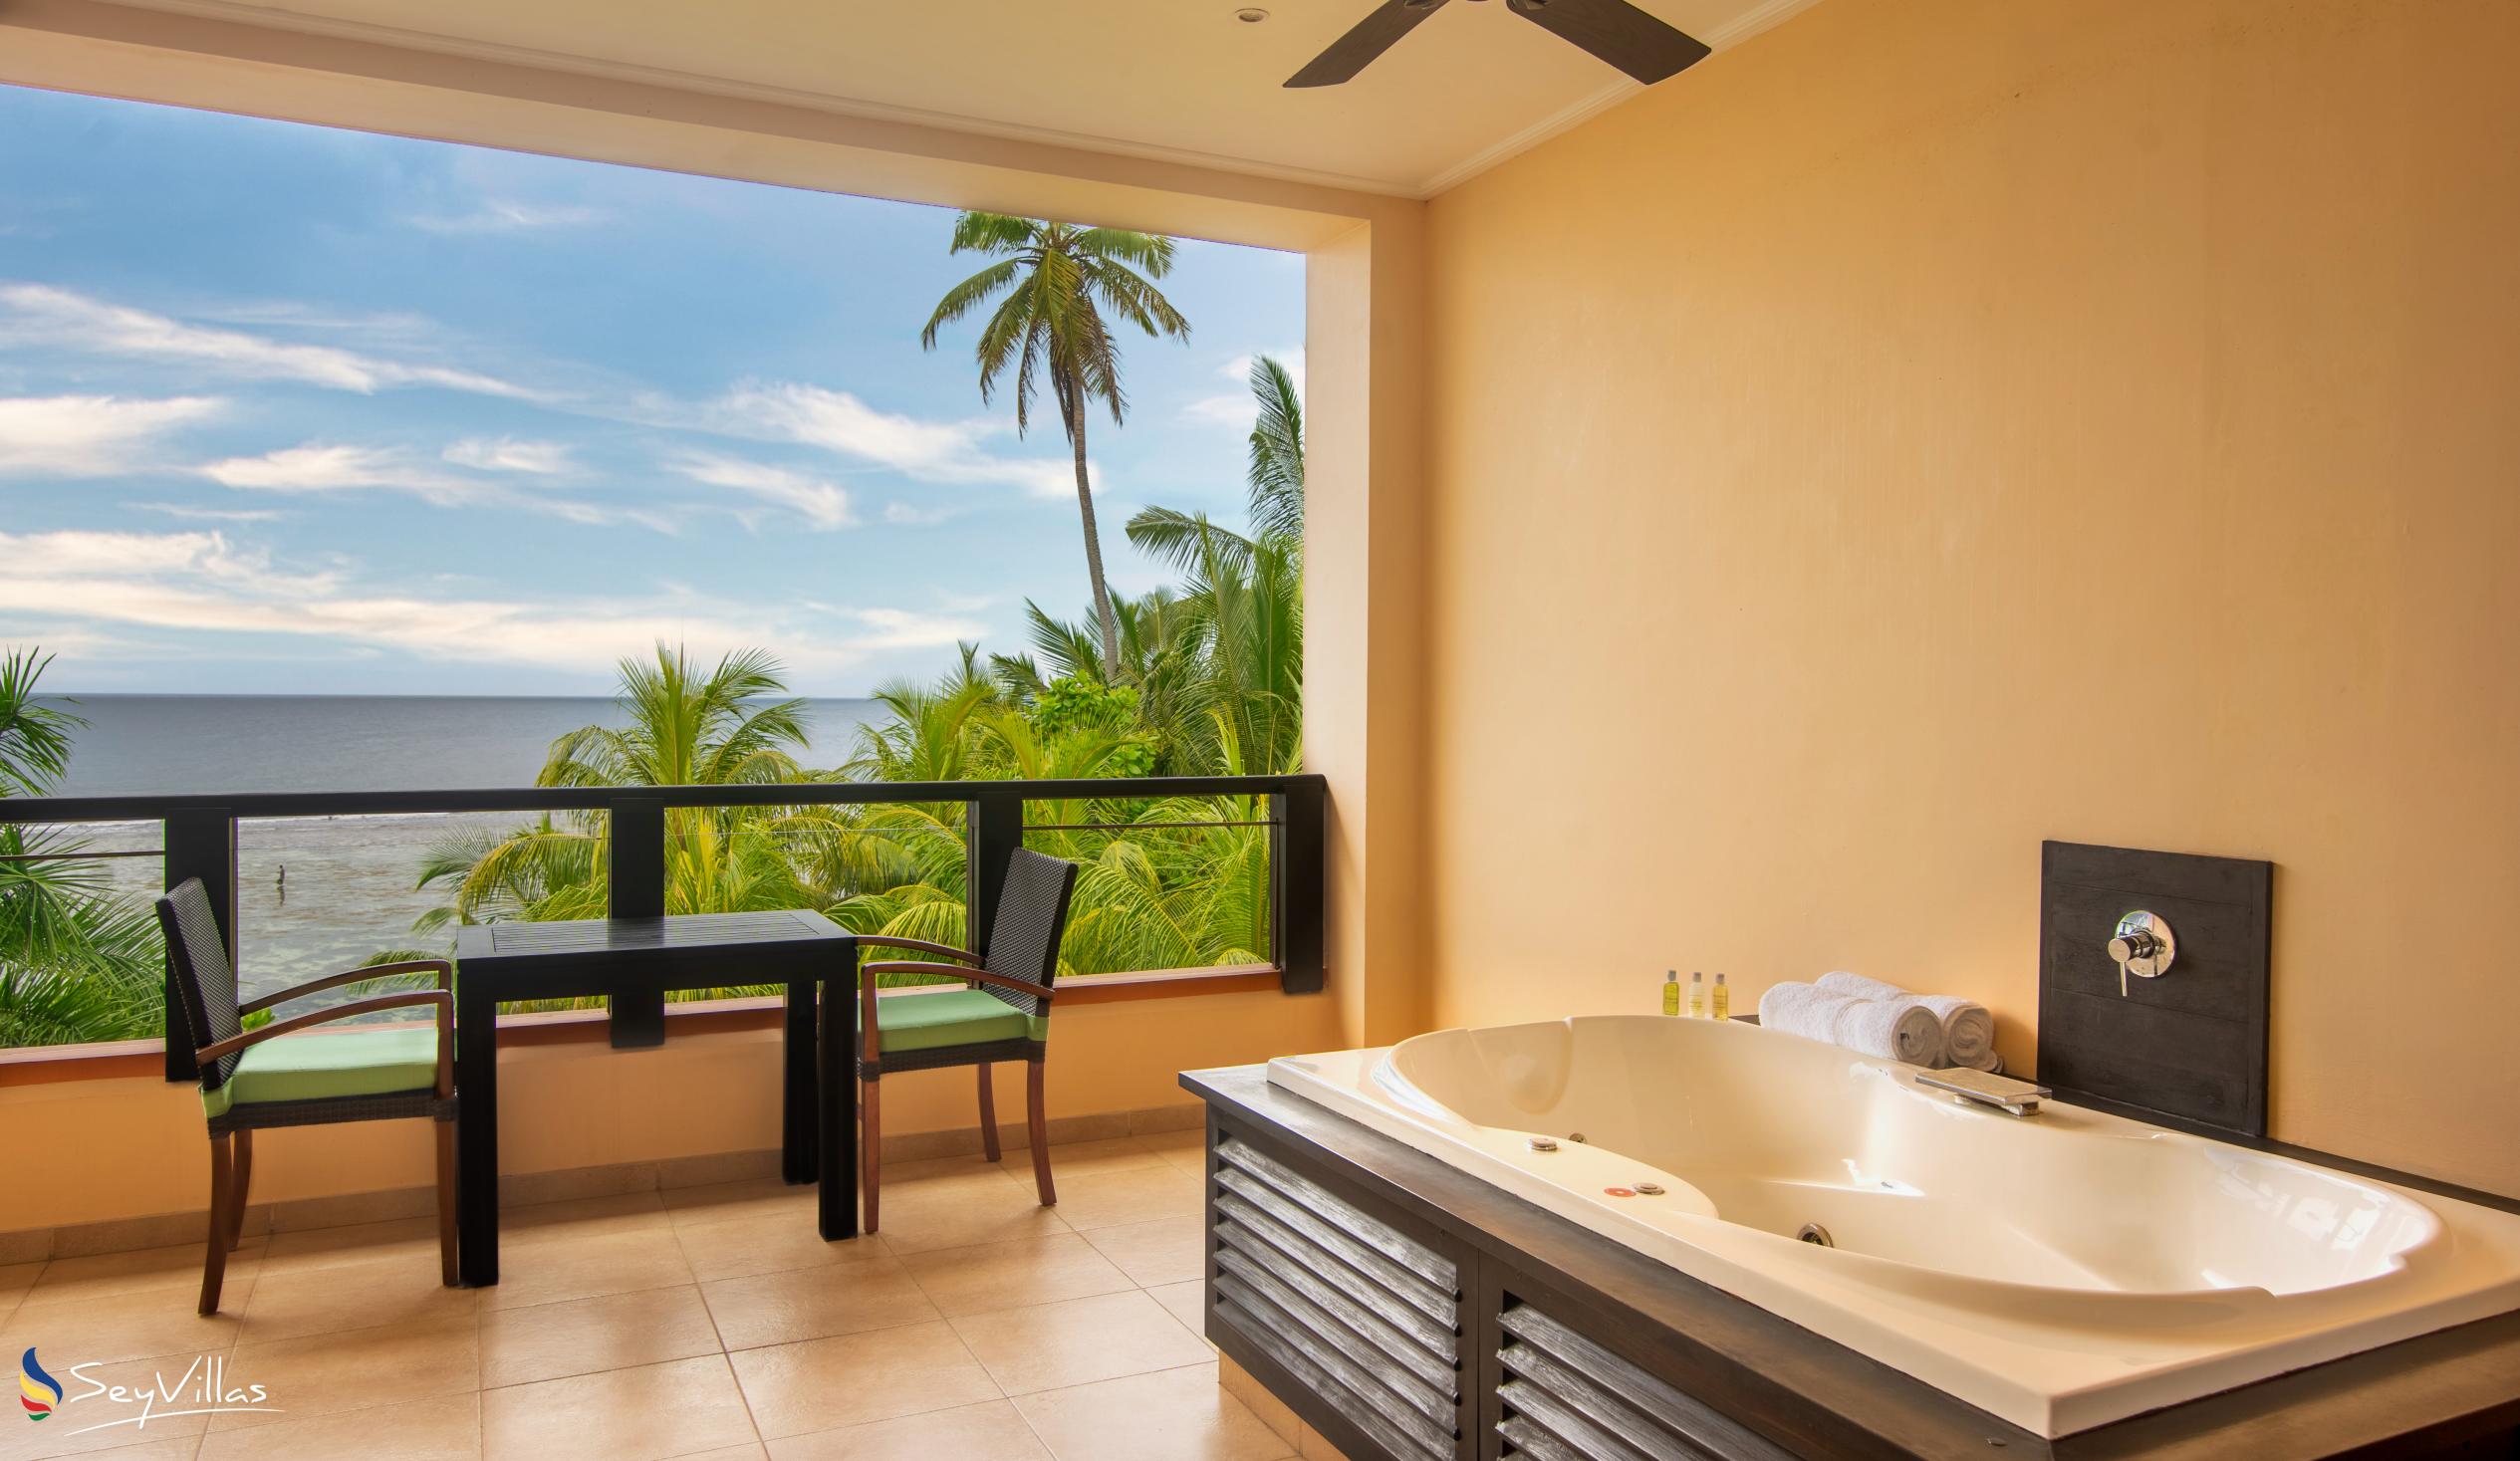 Foto 72: Double Tree by Hilton - Allamanda Resort & Spa - King Premium Room with Ocean View with Jacuzzi - Mahé (Seychellen)